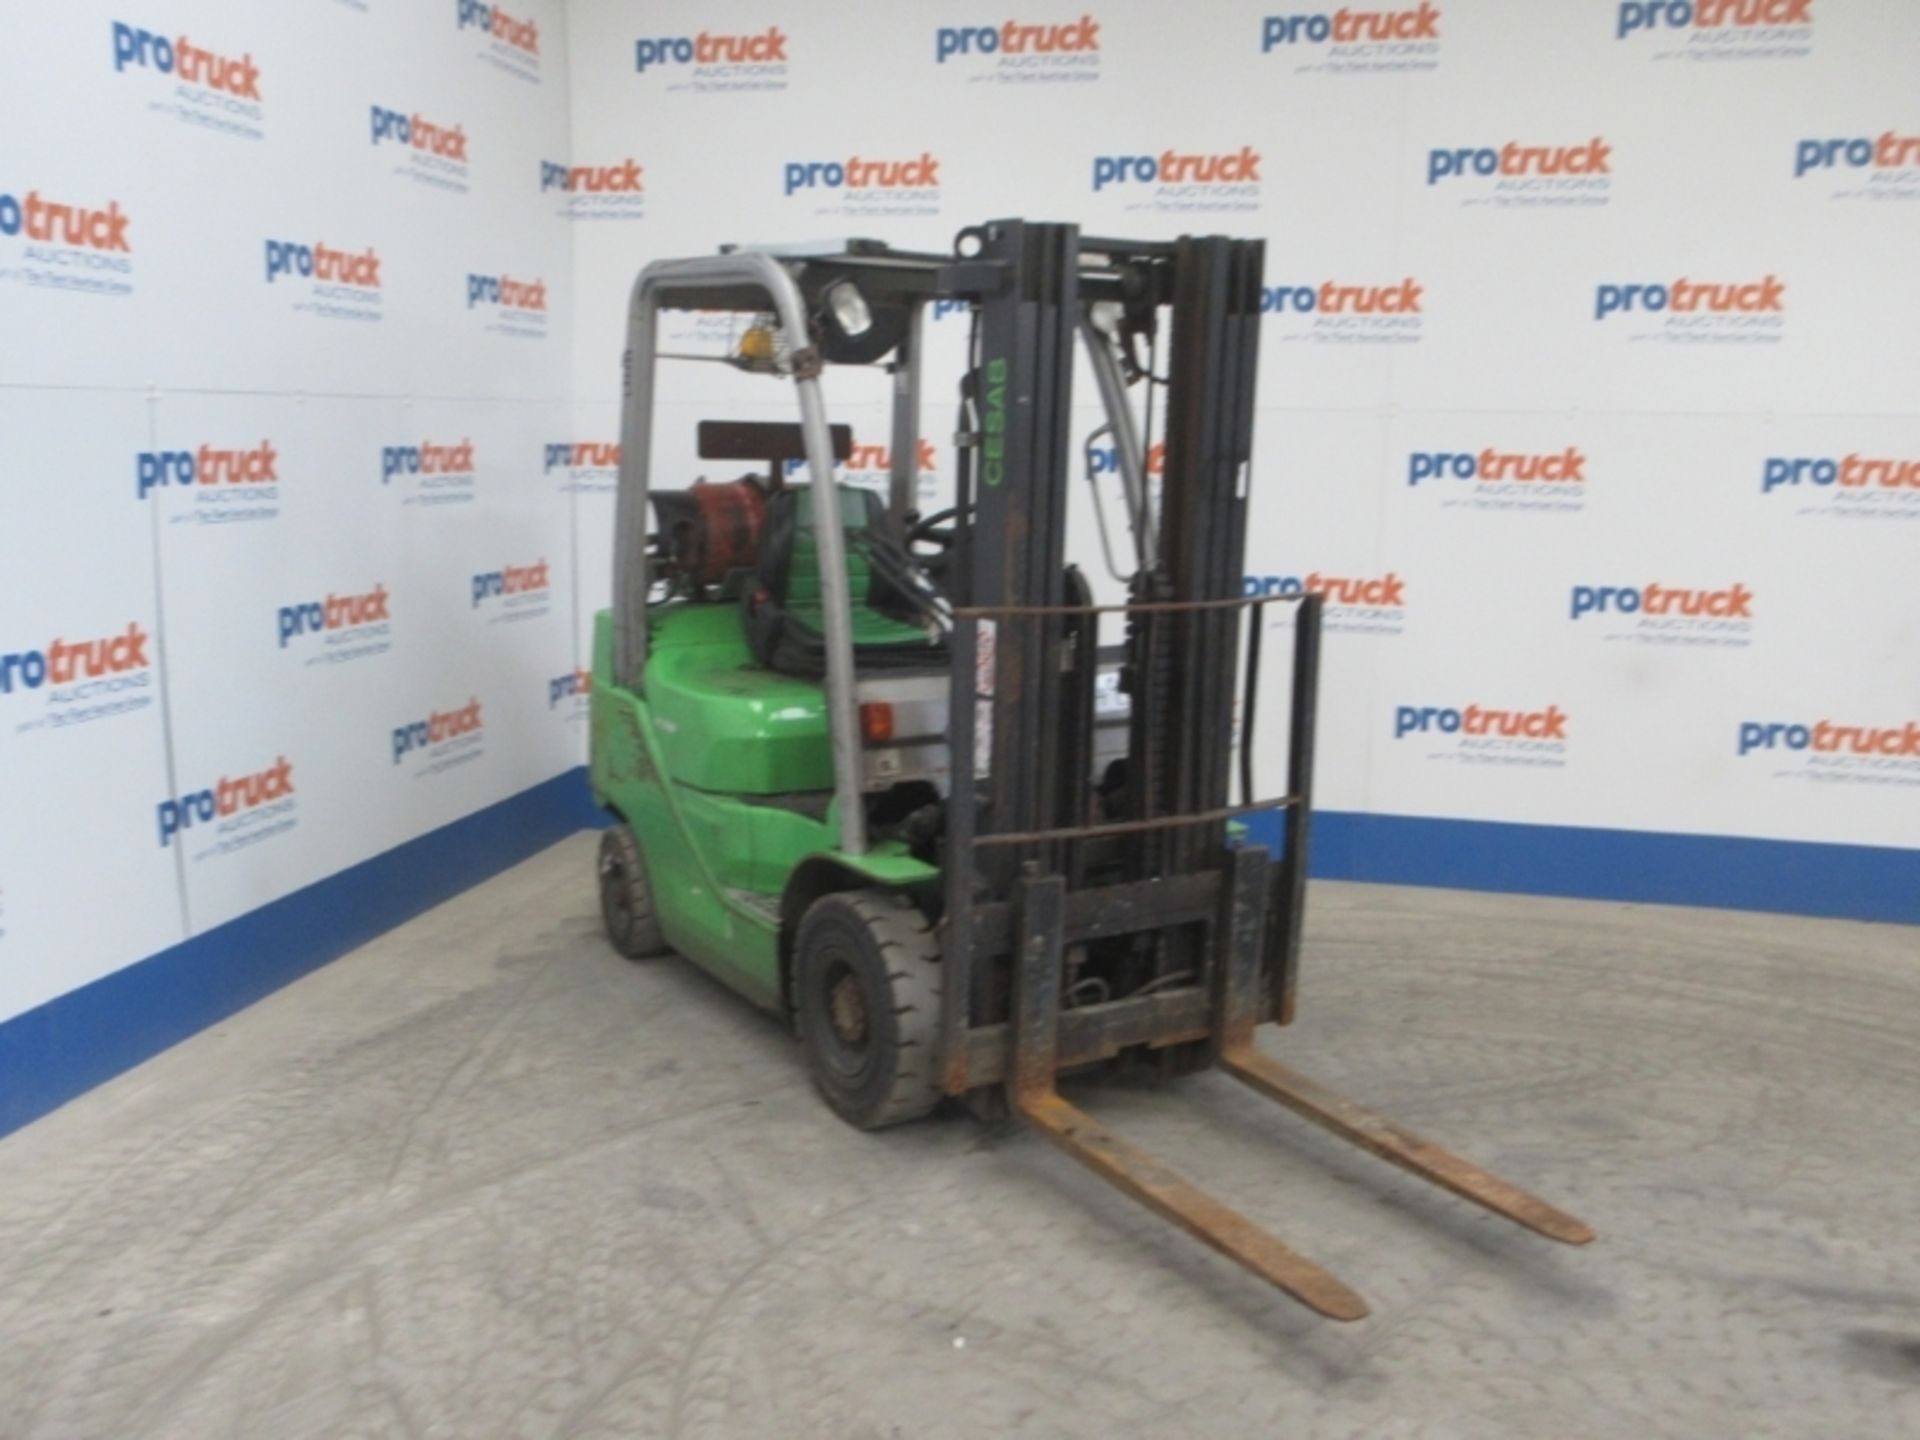 CESAB M318G Plant LPG / CNG - VIN: CE371985 - Year: 2012 - ? Hours - Triplex sideshift forklift RDL - Image 2 of 8